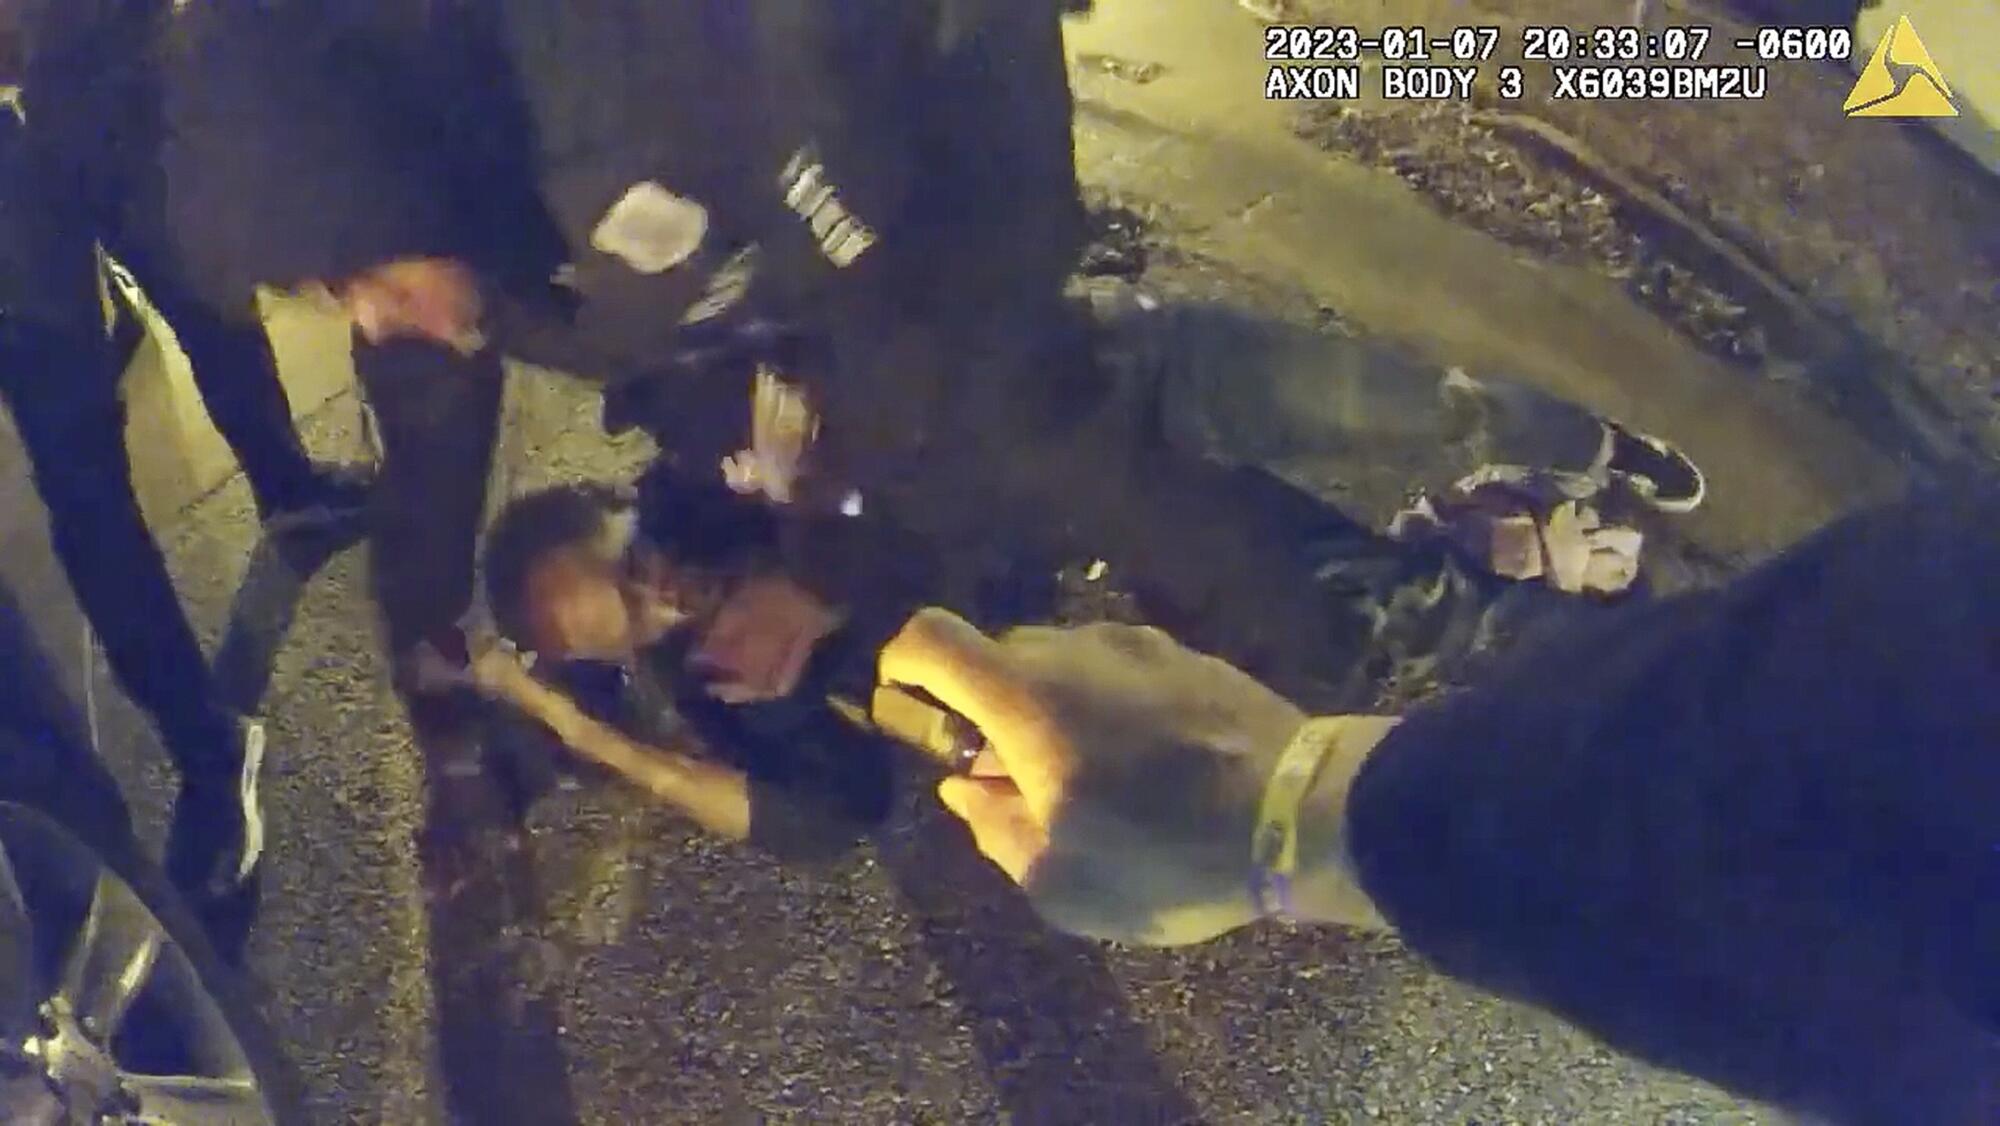 A man cowers on the ground while being pepper-sprayed and restrained by police.